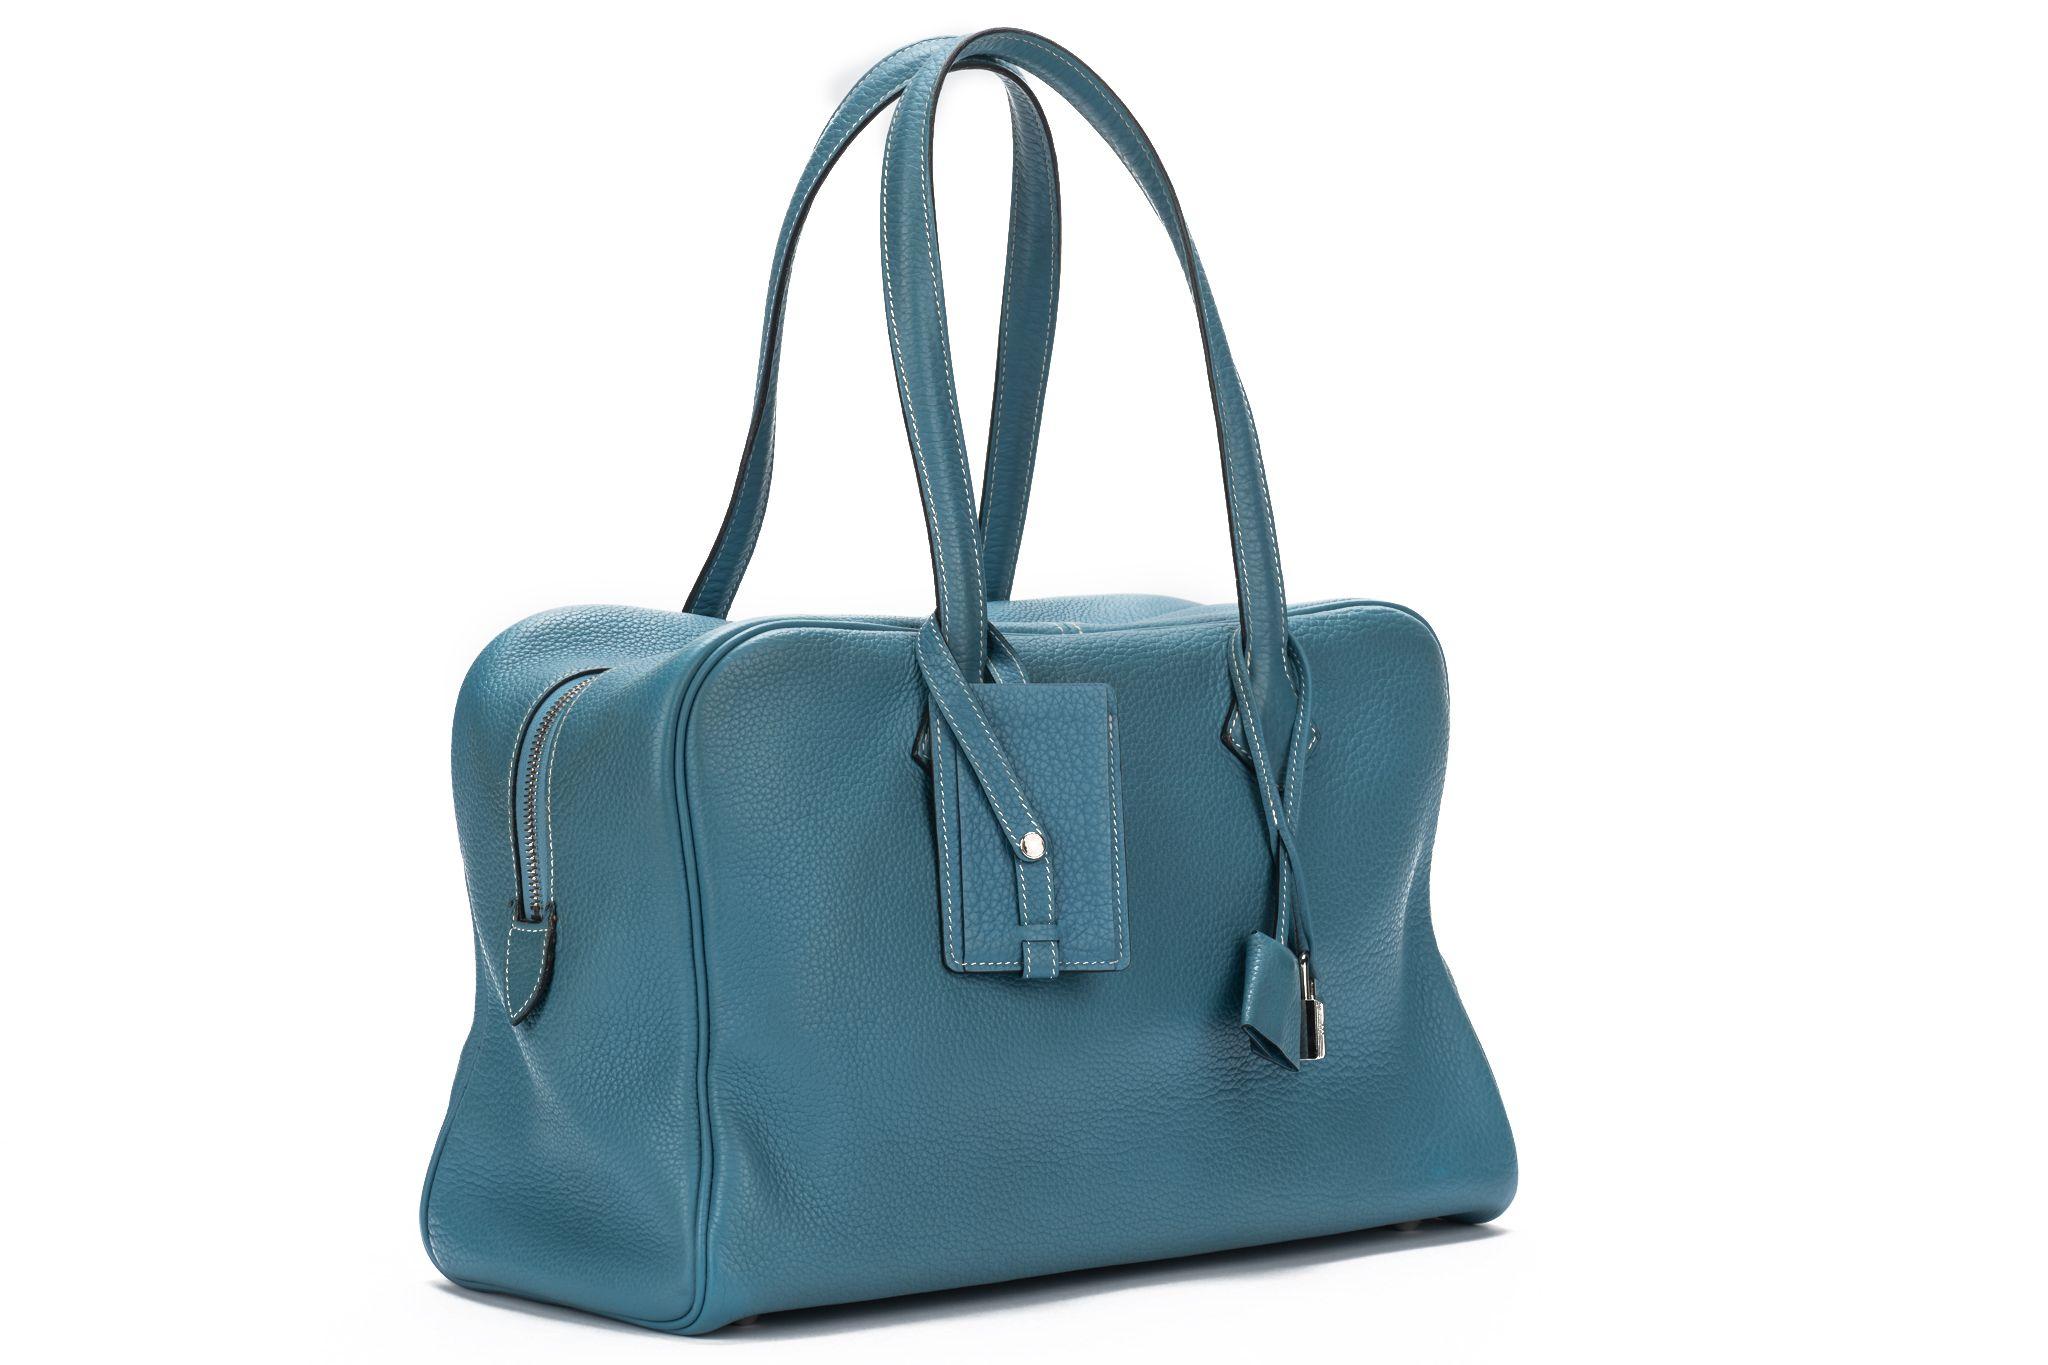 HERMÈS Victoria handbag in blue jean togo leather with a palladium metal hardware. The double handle (8') allows the bag to be worn in the hand or on the shoulder.Date stamp L. It comes with the original dust bag.